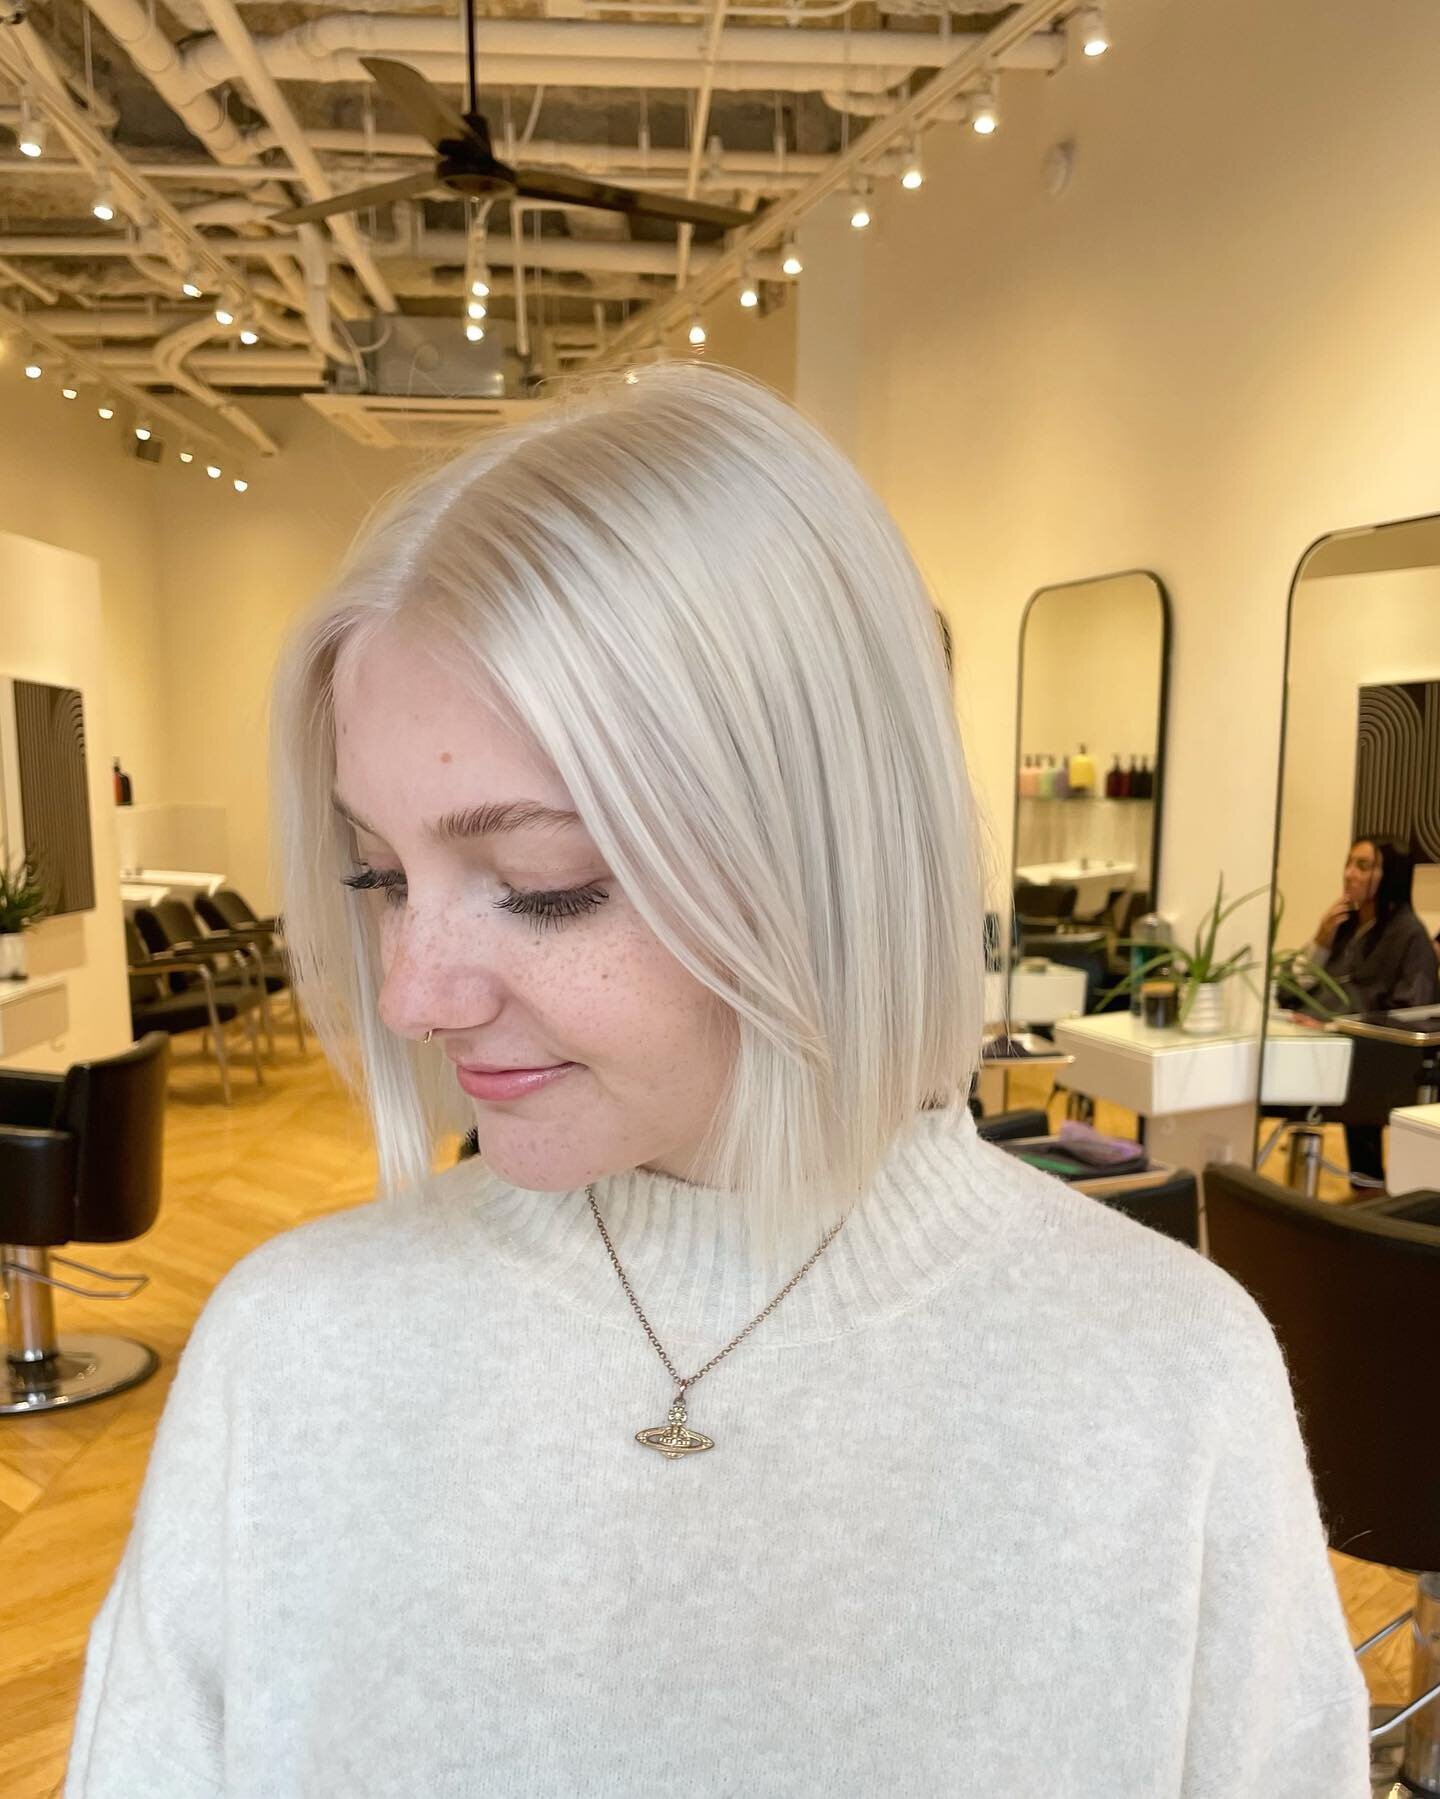 Double Process⚡️⚡️#color and #style by @tracydaviss #hair #haircolor #hairstyle #doubleprocess #bleachandtone #bleach #bleached #bleachblonde #coolblonde #iceblonde #blondebob #oribe #redken #wella #t3micro #hotd #hairgoals #hairenvy #hairinspo #hair